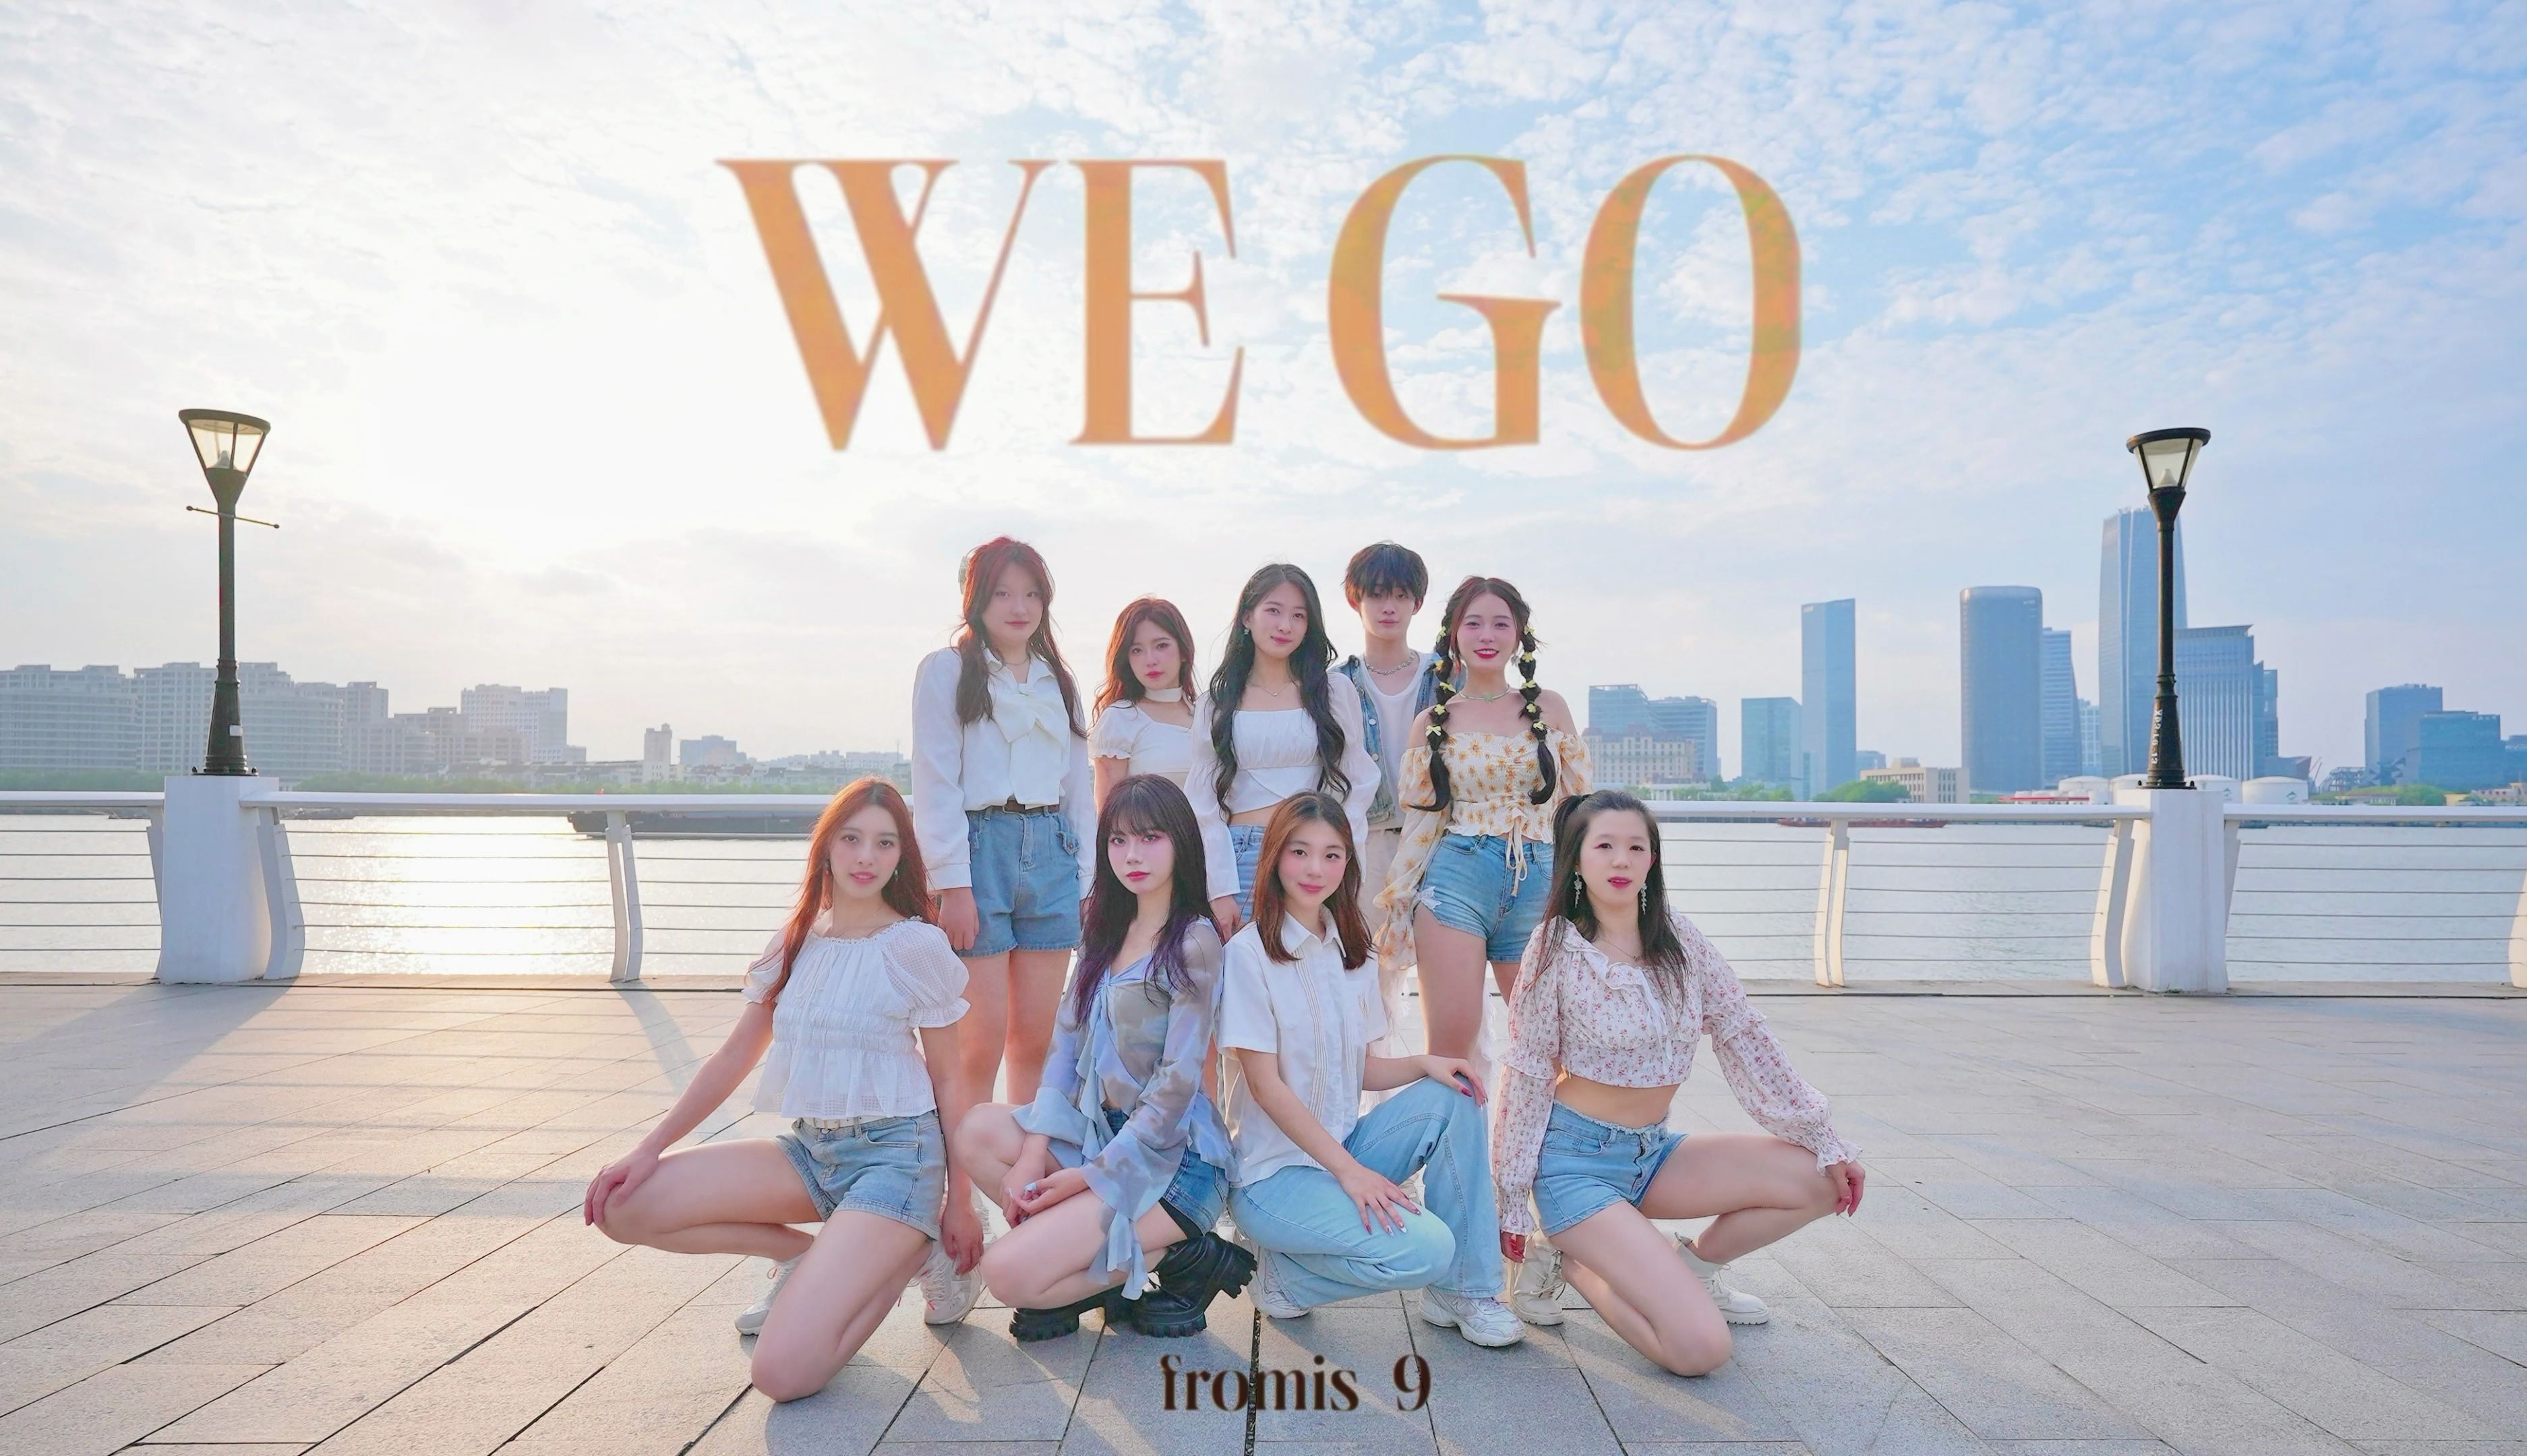 【fromis_9】在夏日中对你心动：《WE GO》舞蹈版 Come with me now